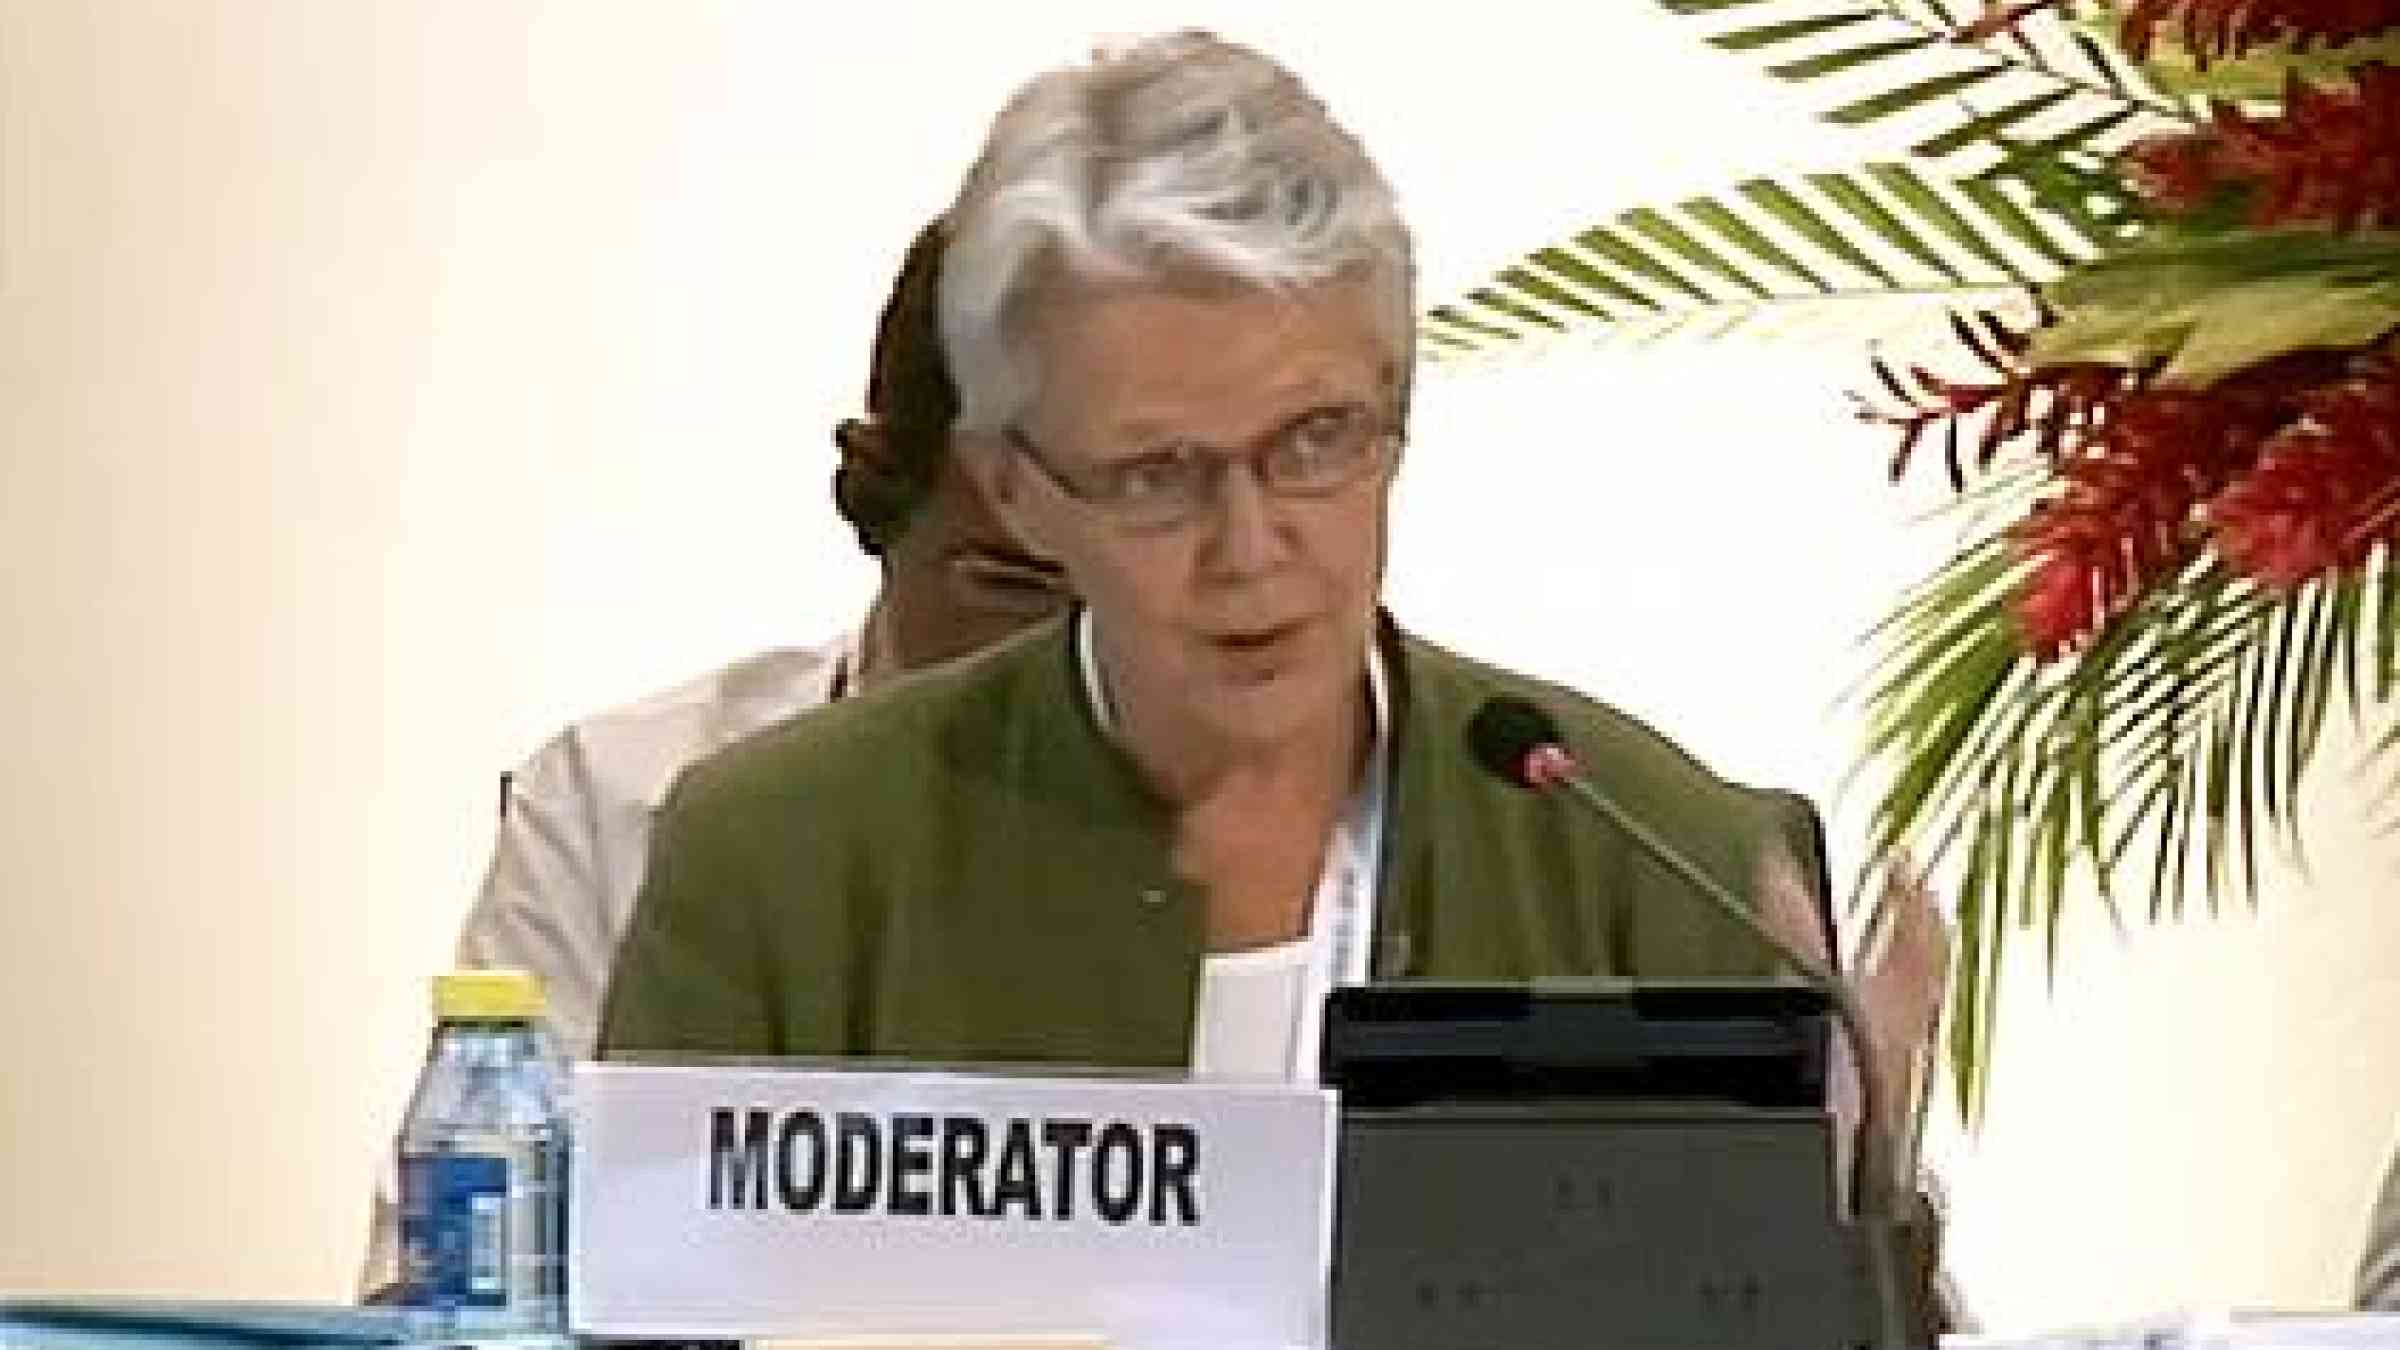 Head of UNISDR, Margareta Wahlstrom, moderating the DRR session at the SIDS Conference yesterday. (Photo: Screenschot from UN Web TV)